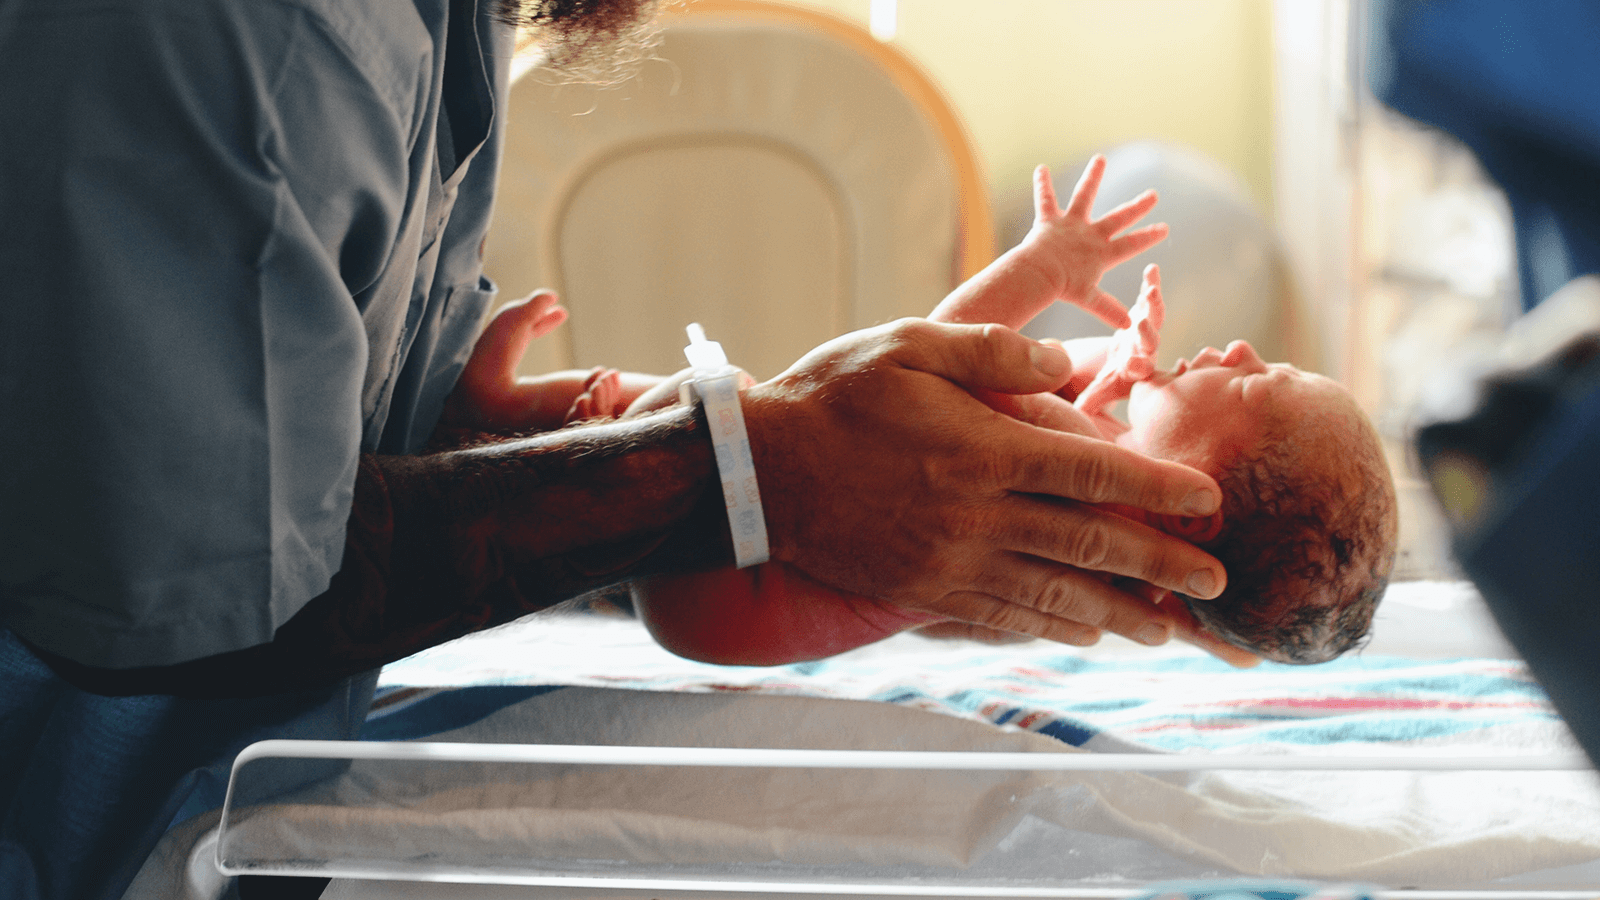 An adult with a hospital bracelet on has their hands in view while holding a newborn baby over a plastic hospital bassinet.